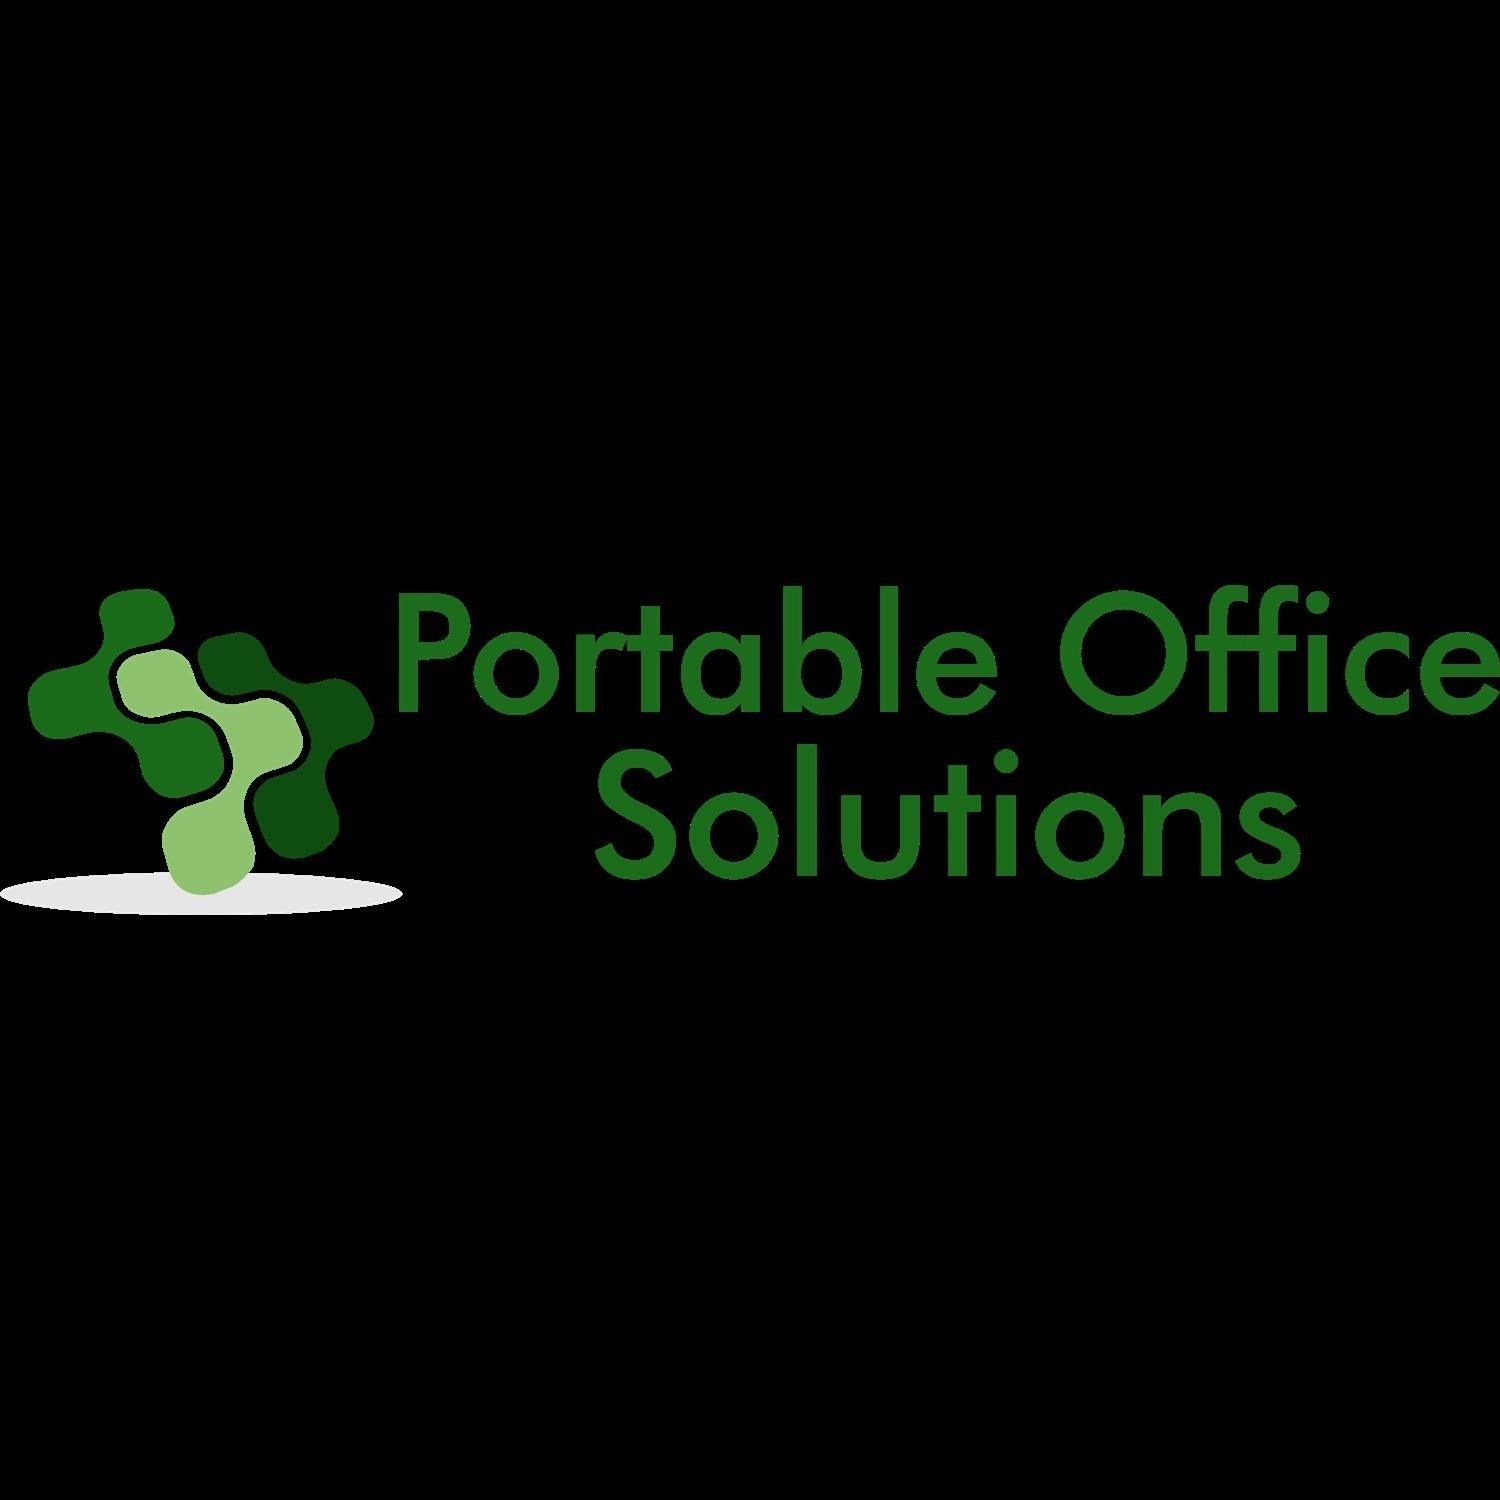 Portable Office Solutions Phone Number 1300